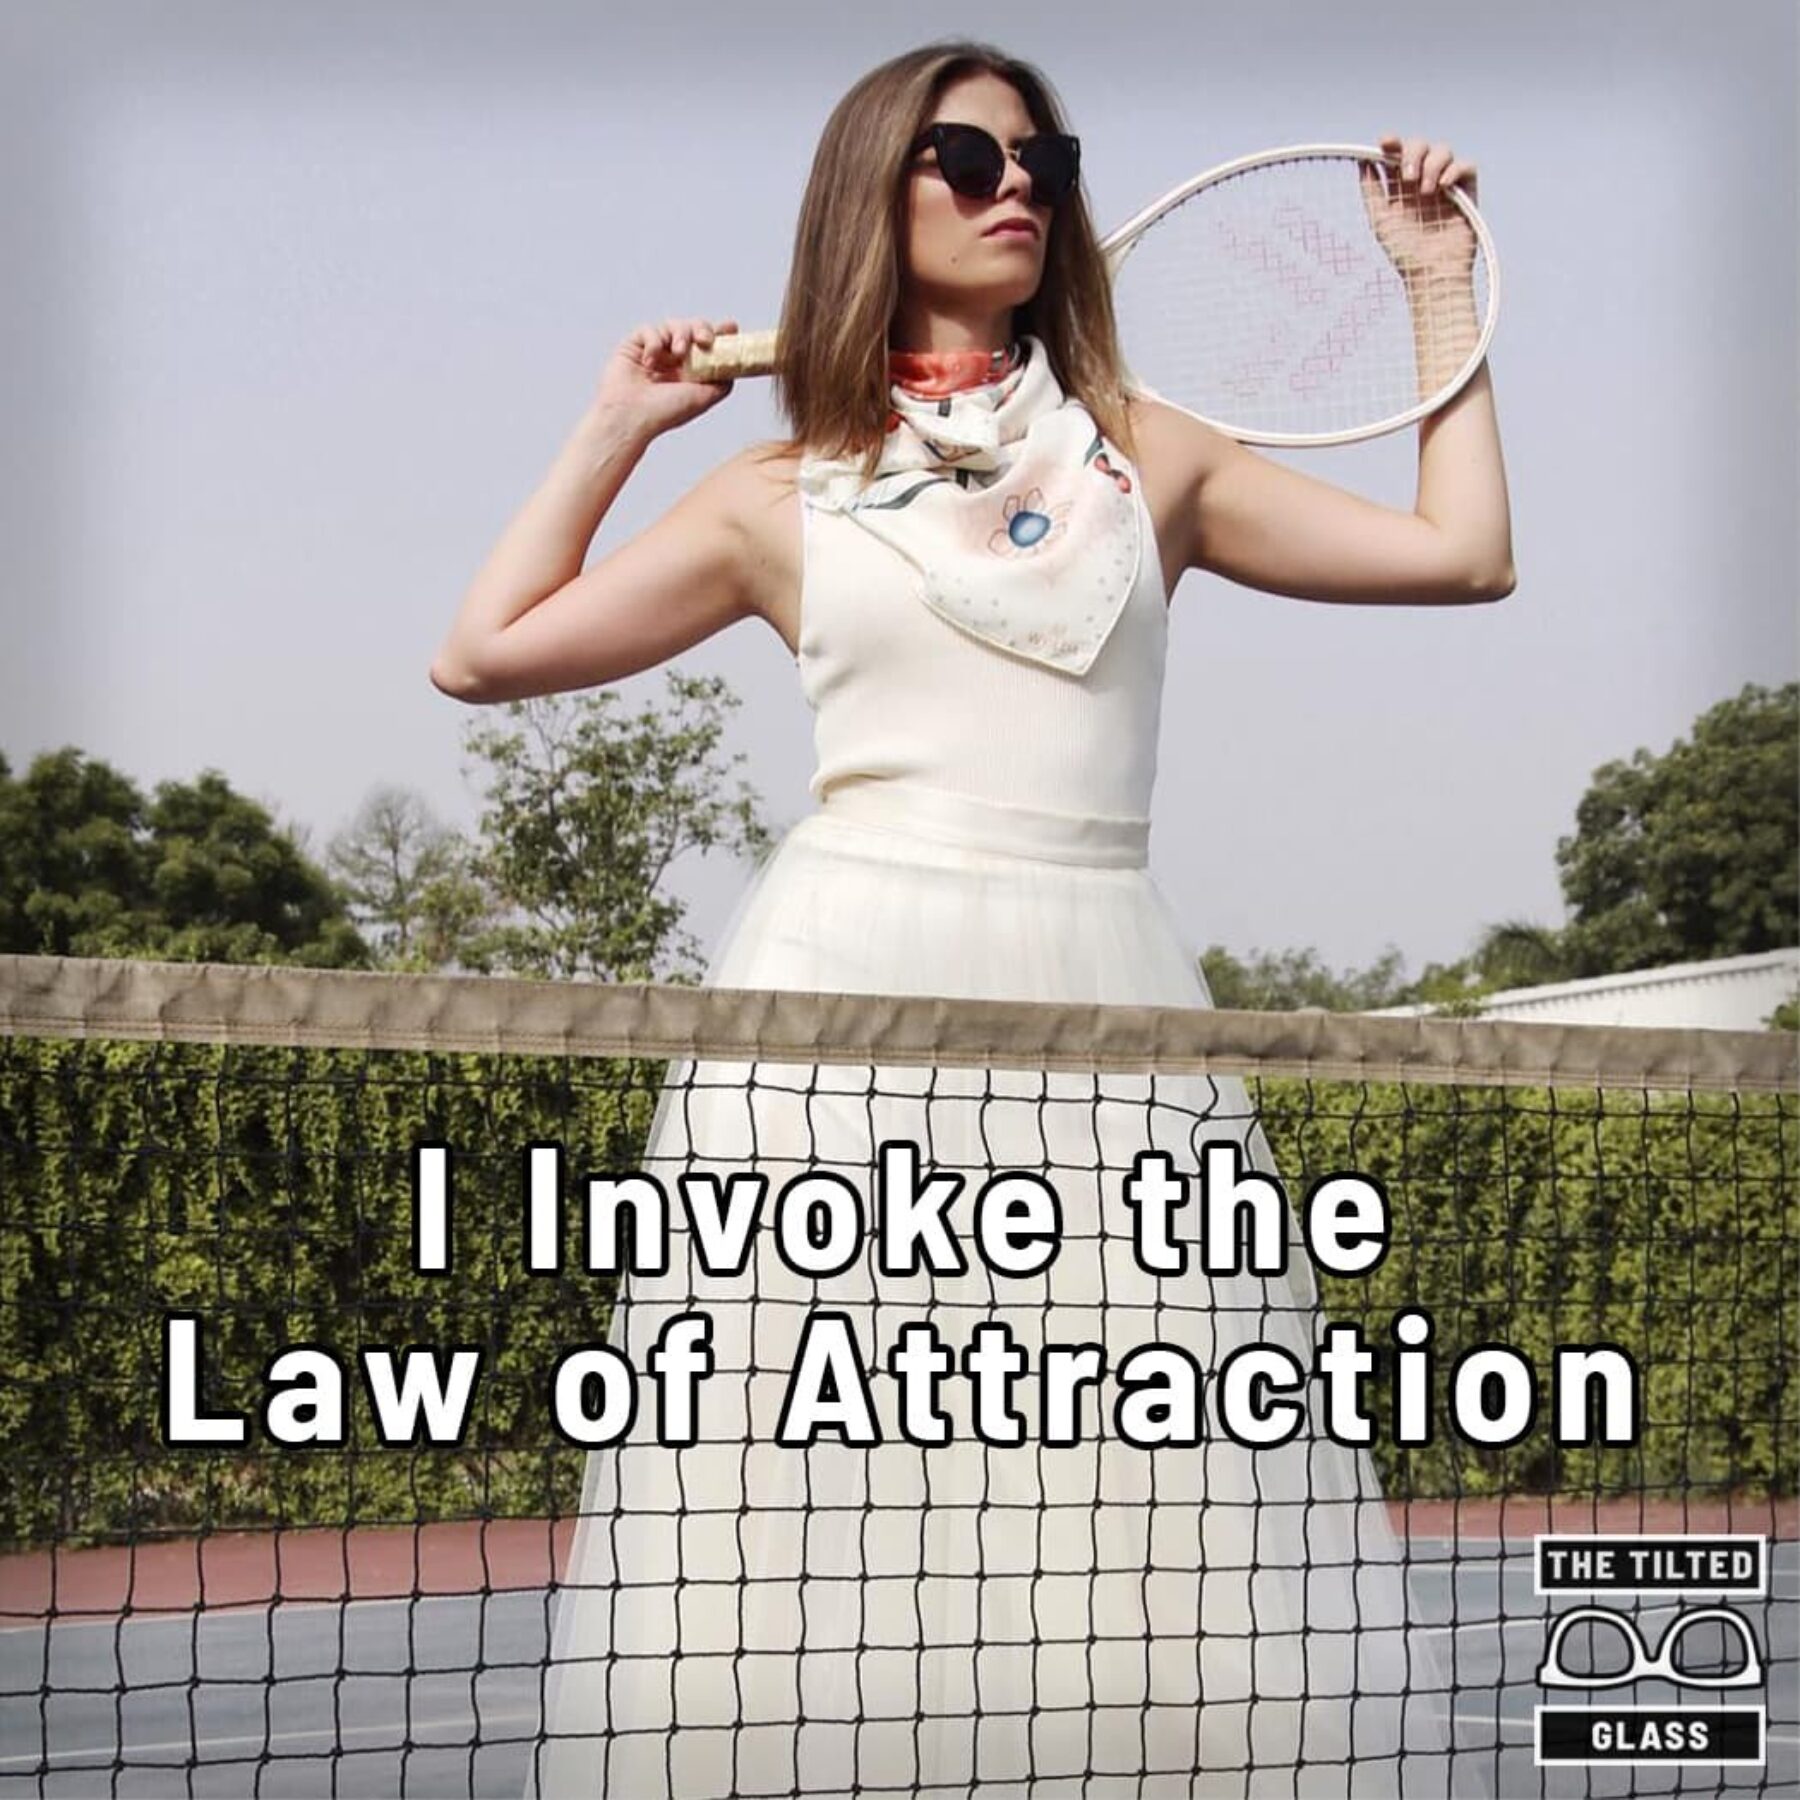 I Invoke the Law of Attraction